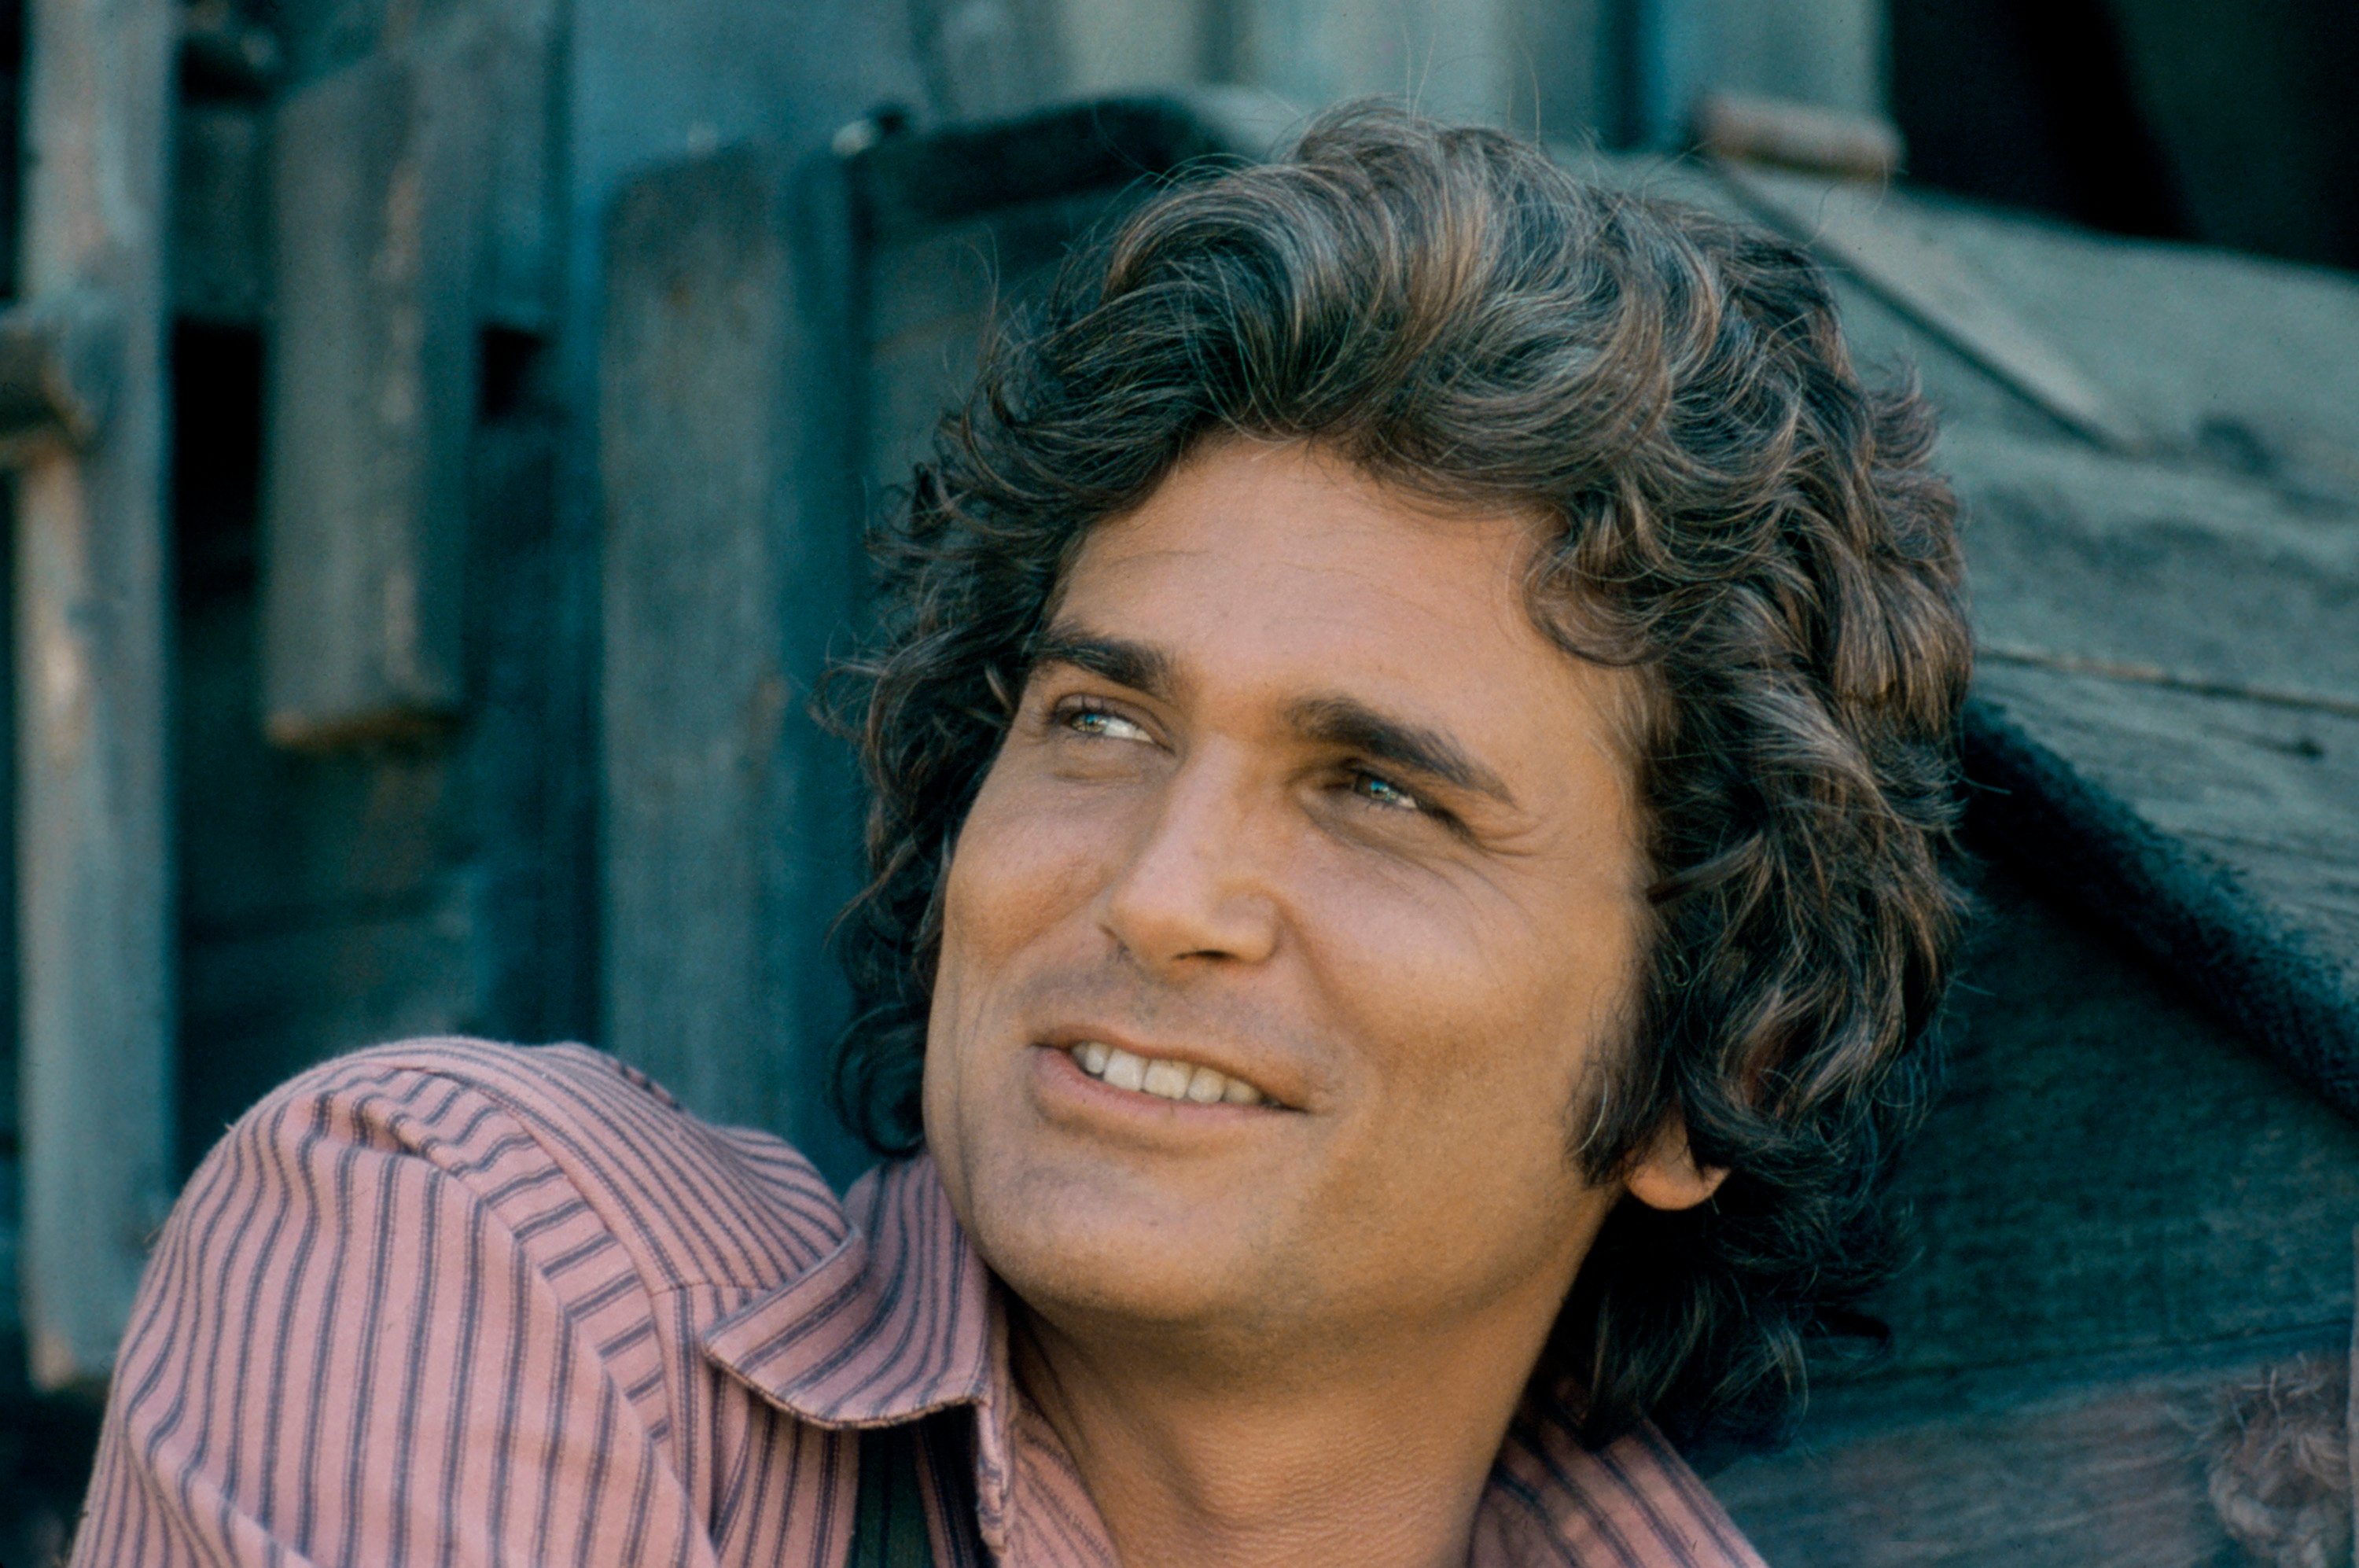 Michael Landon as Charles Ingalls on Little House on the Prairie | NBCU Photo Bank/NBCUniversal via Getty Images